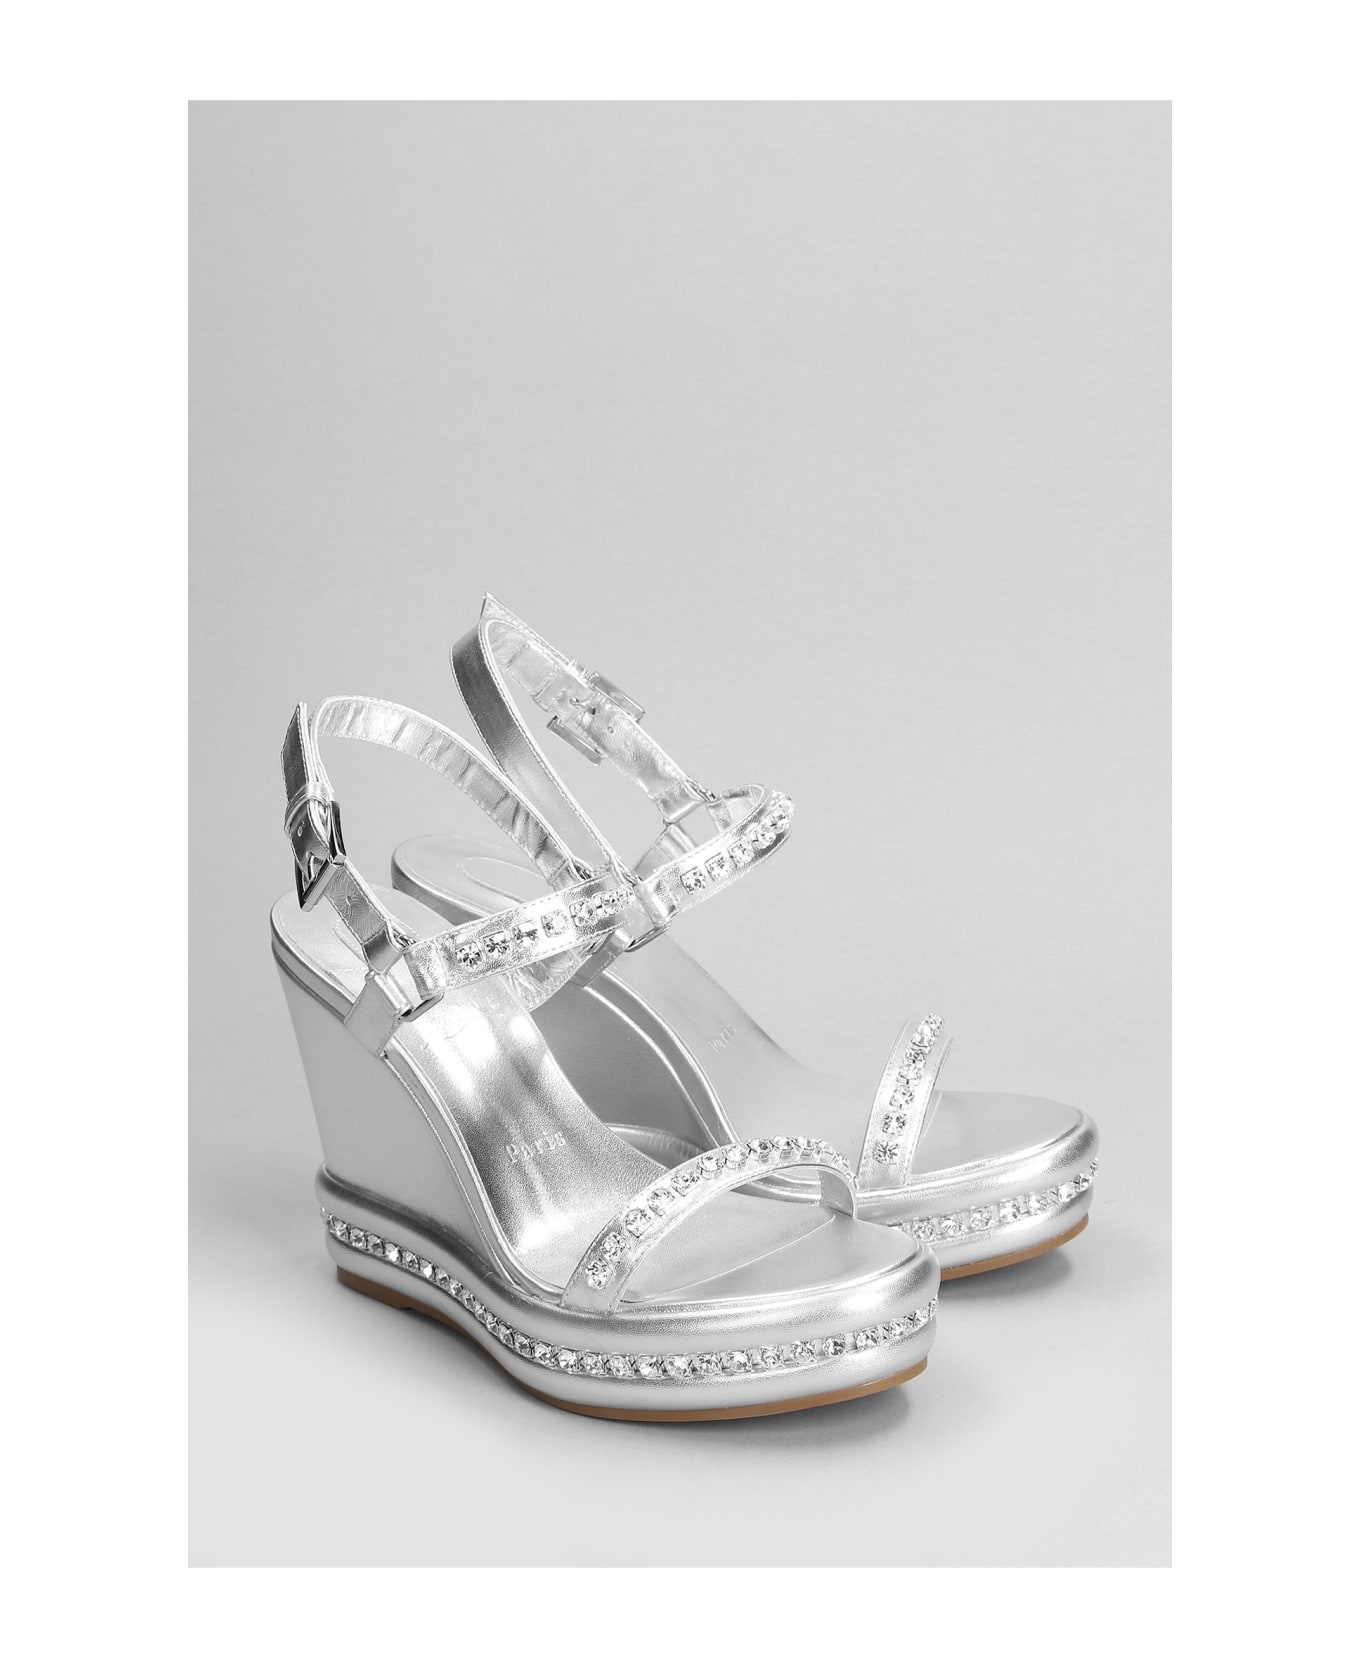 Christian Louboutin Pyrastrass 110 Wedges In Silver Leather - silver